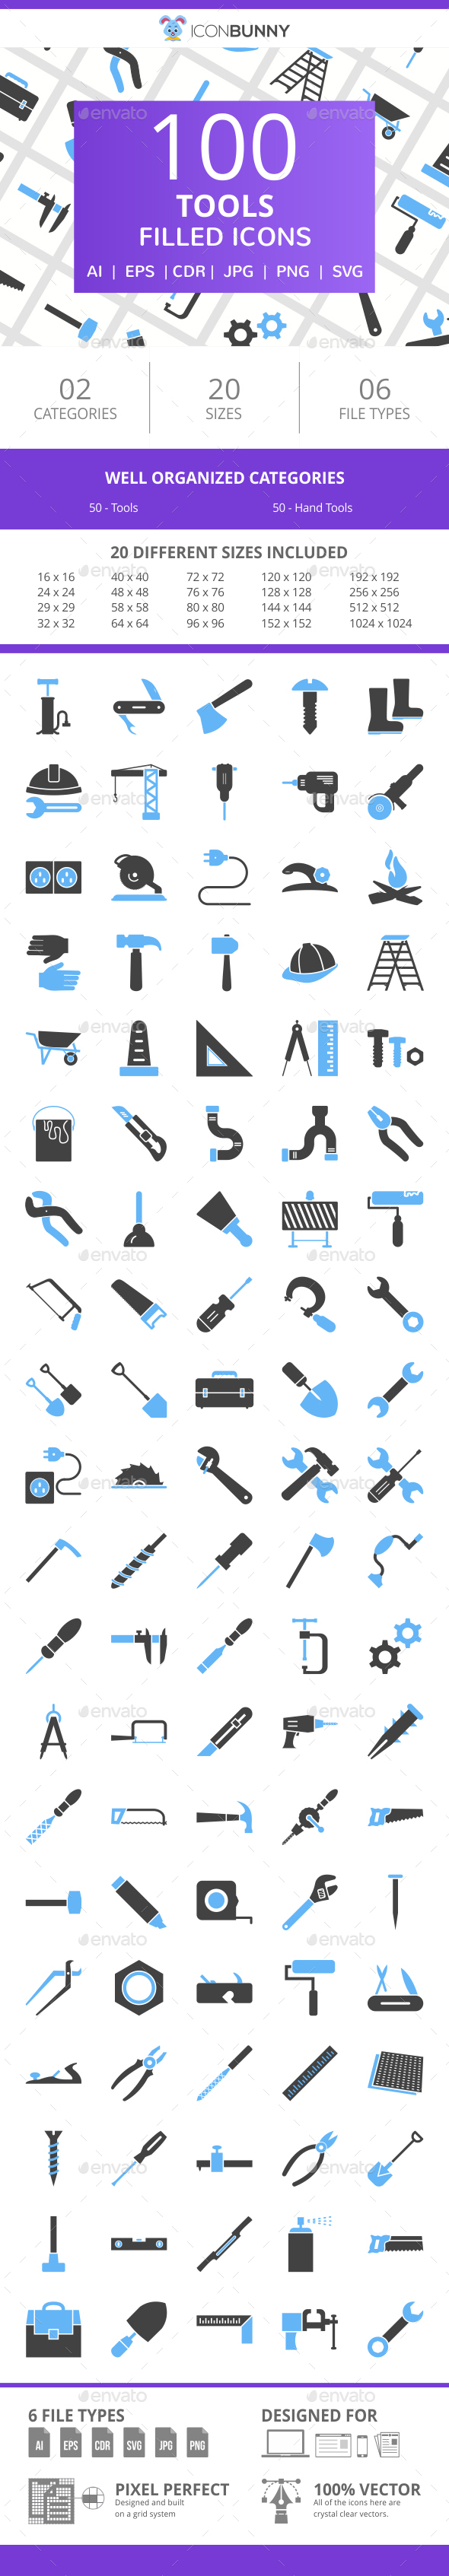 100 Tools Filled Blue & Black Icons